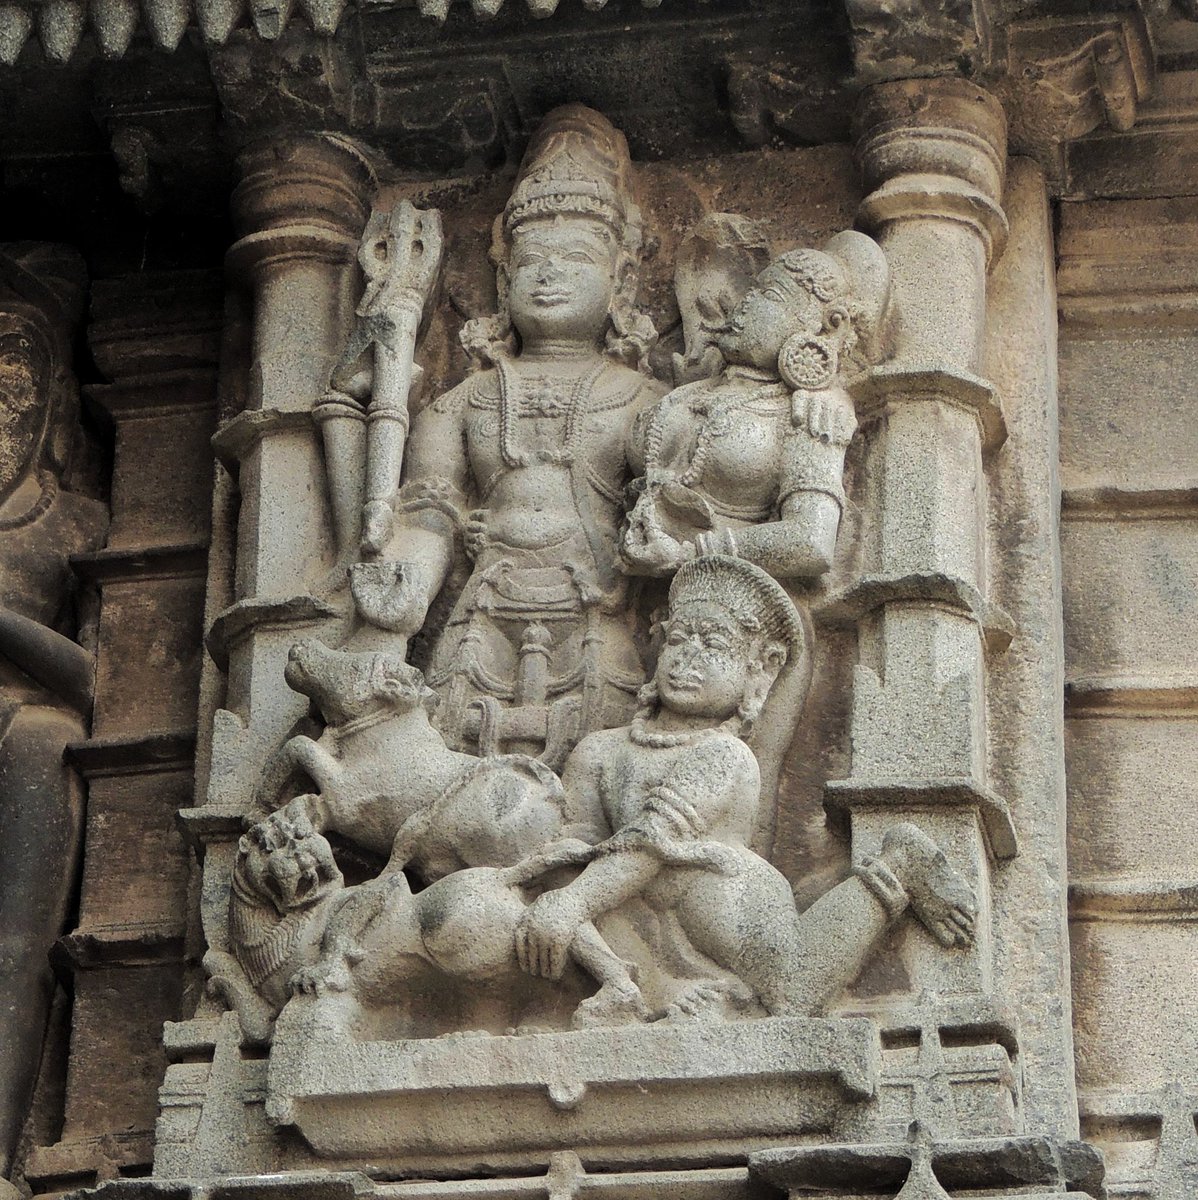 उ is for उमा-महेश्वरा. The Vahanas and the gana running behind them add a touch of playfulness to this sculpture, and also a sense of family. Aundha Naganatha temple, 11th/12th century CE.  #AksharArt  #ArtByTheLetter